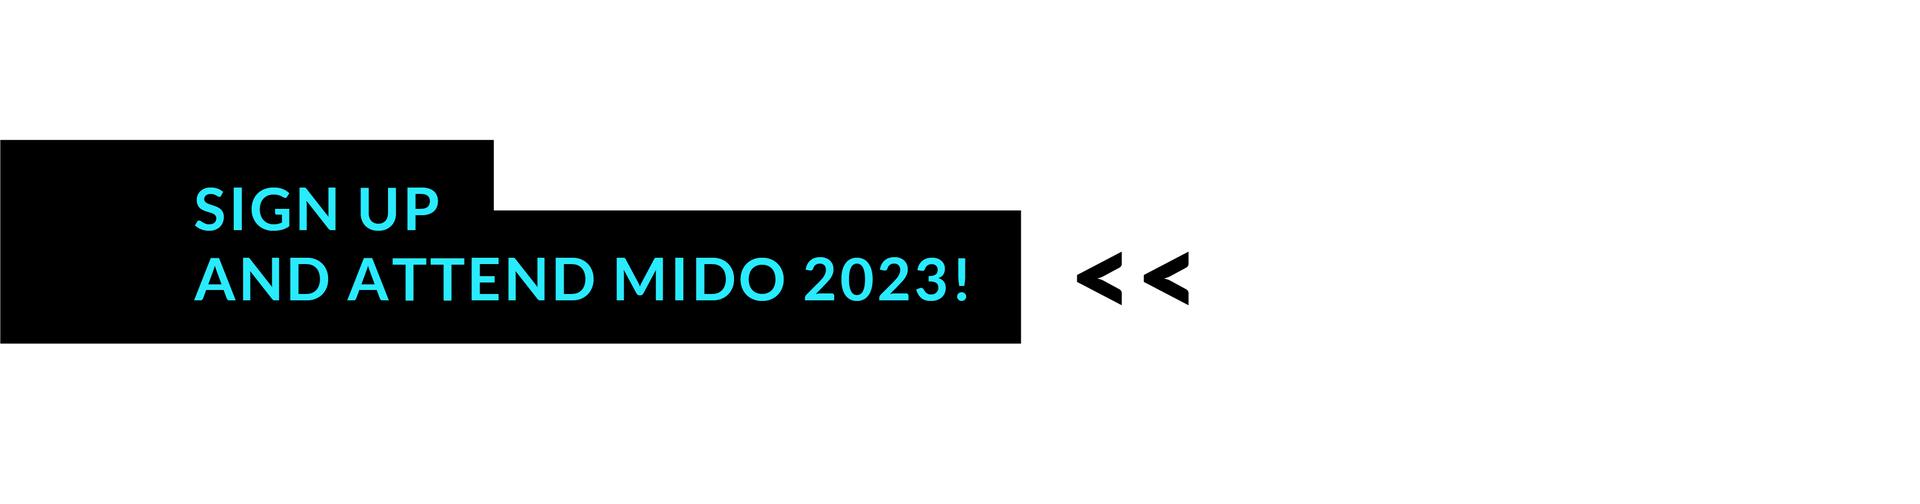 Sign up and attend MIDO 2023!